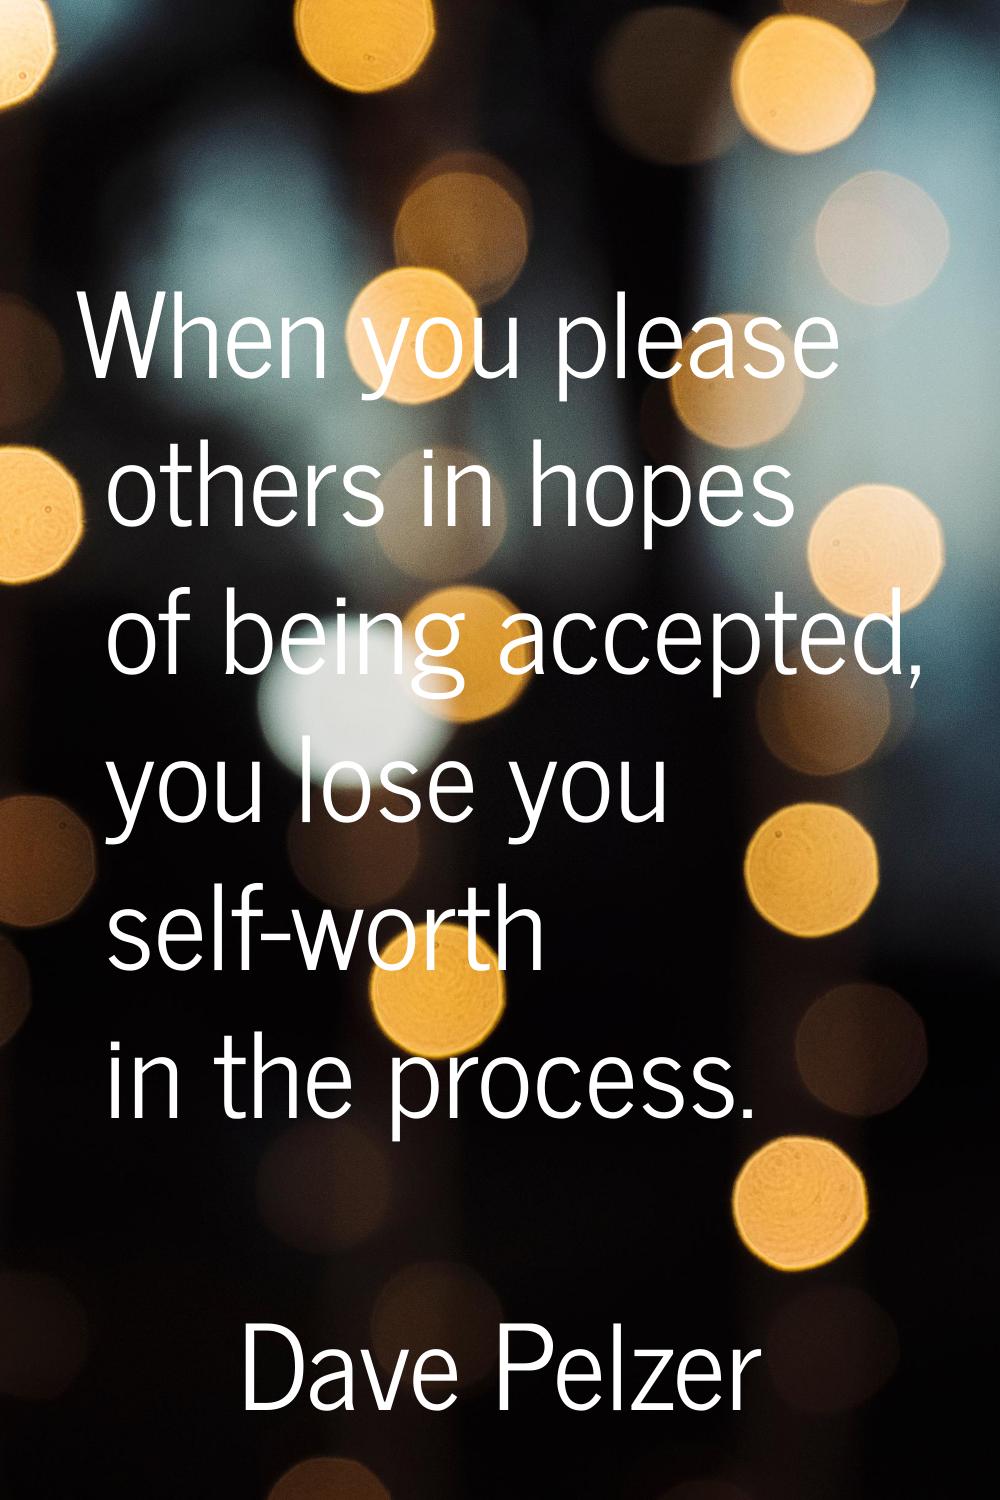 When you please others in hopes of being accepted, you lose you self-worth in the process.